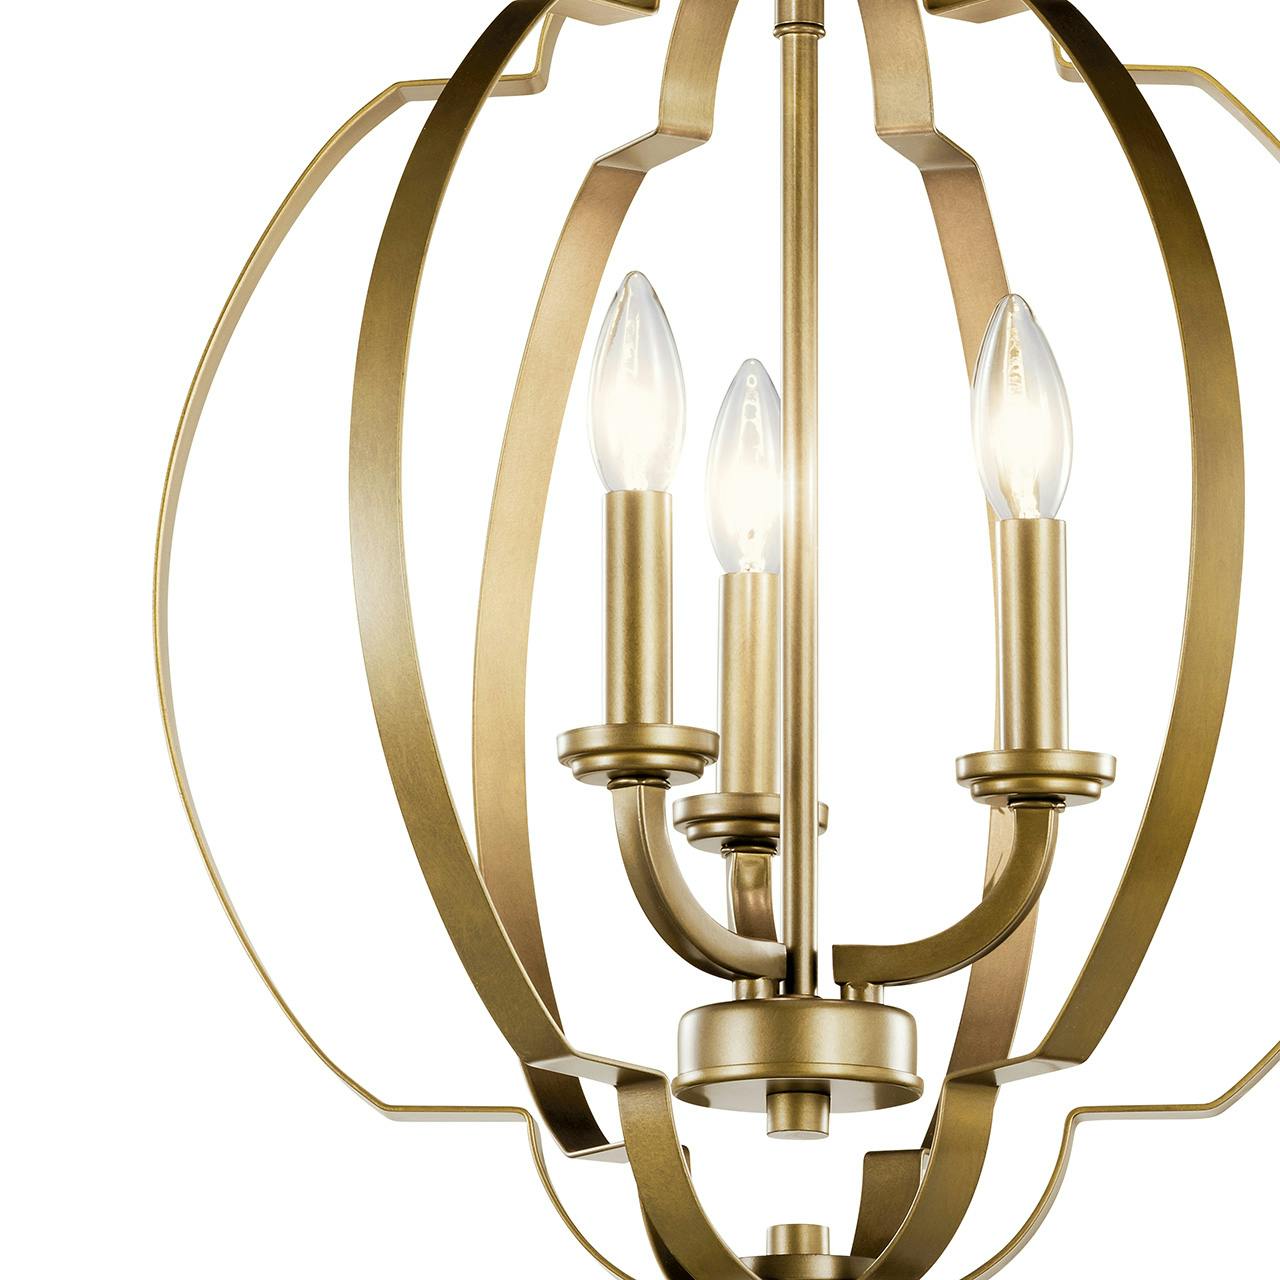 Close up view of the Voleta 20.75" 3 Light Pendant Brass on a white background